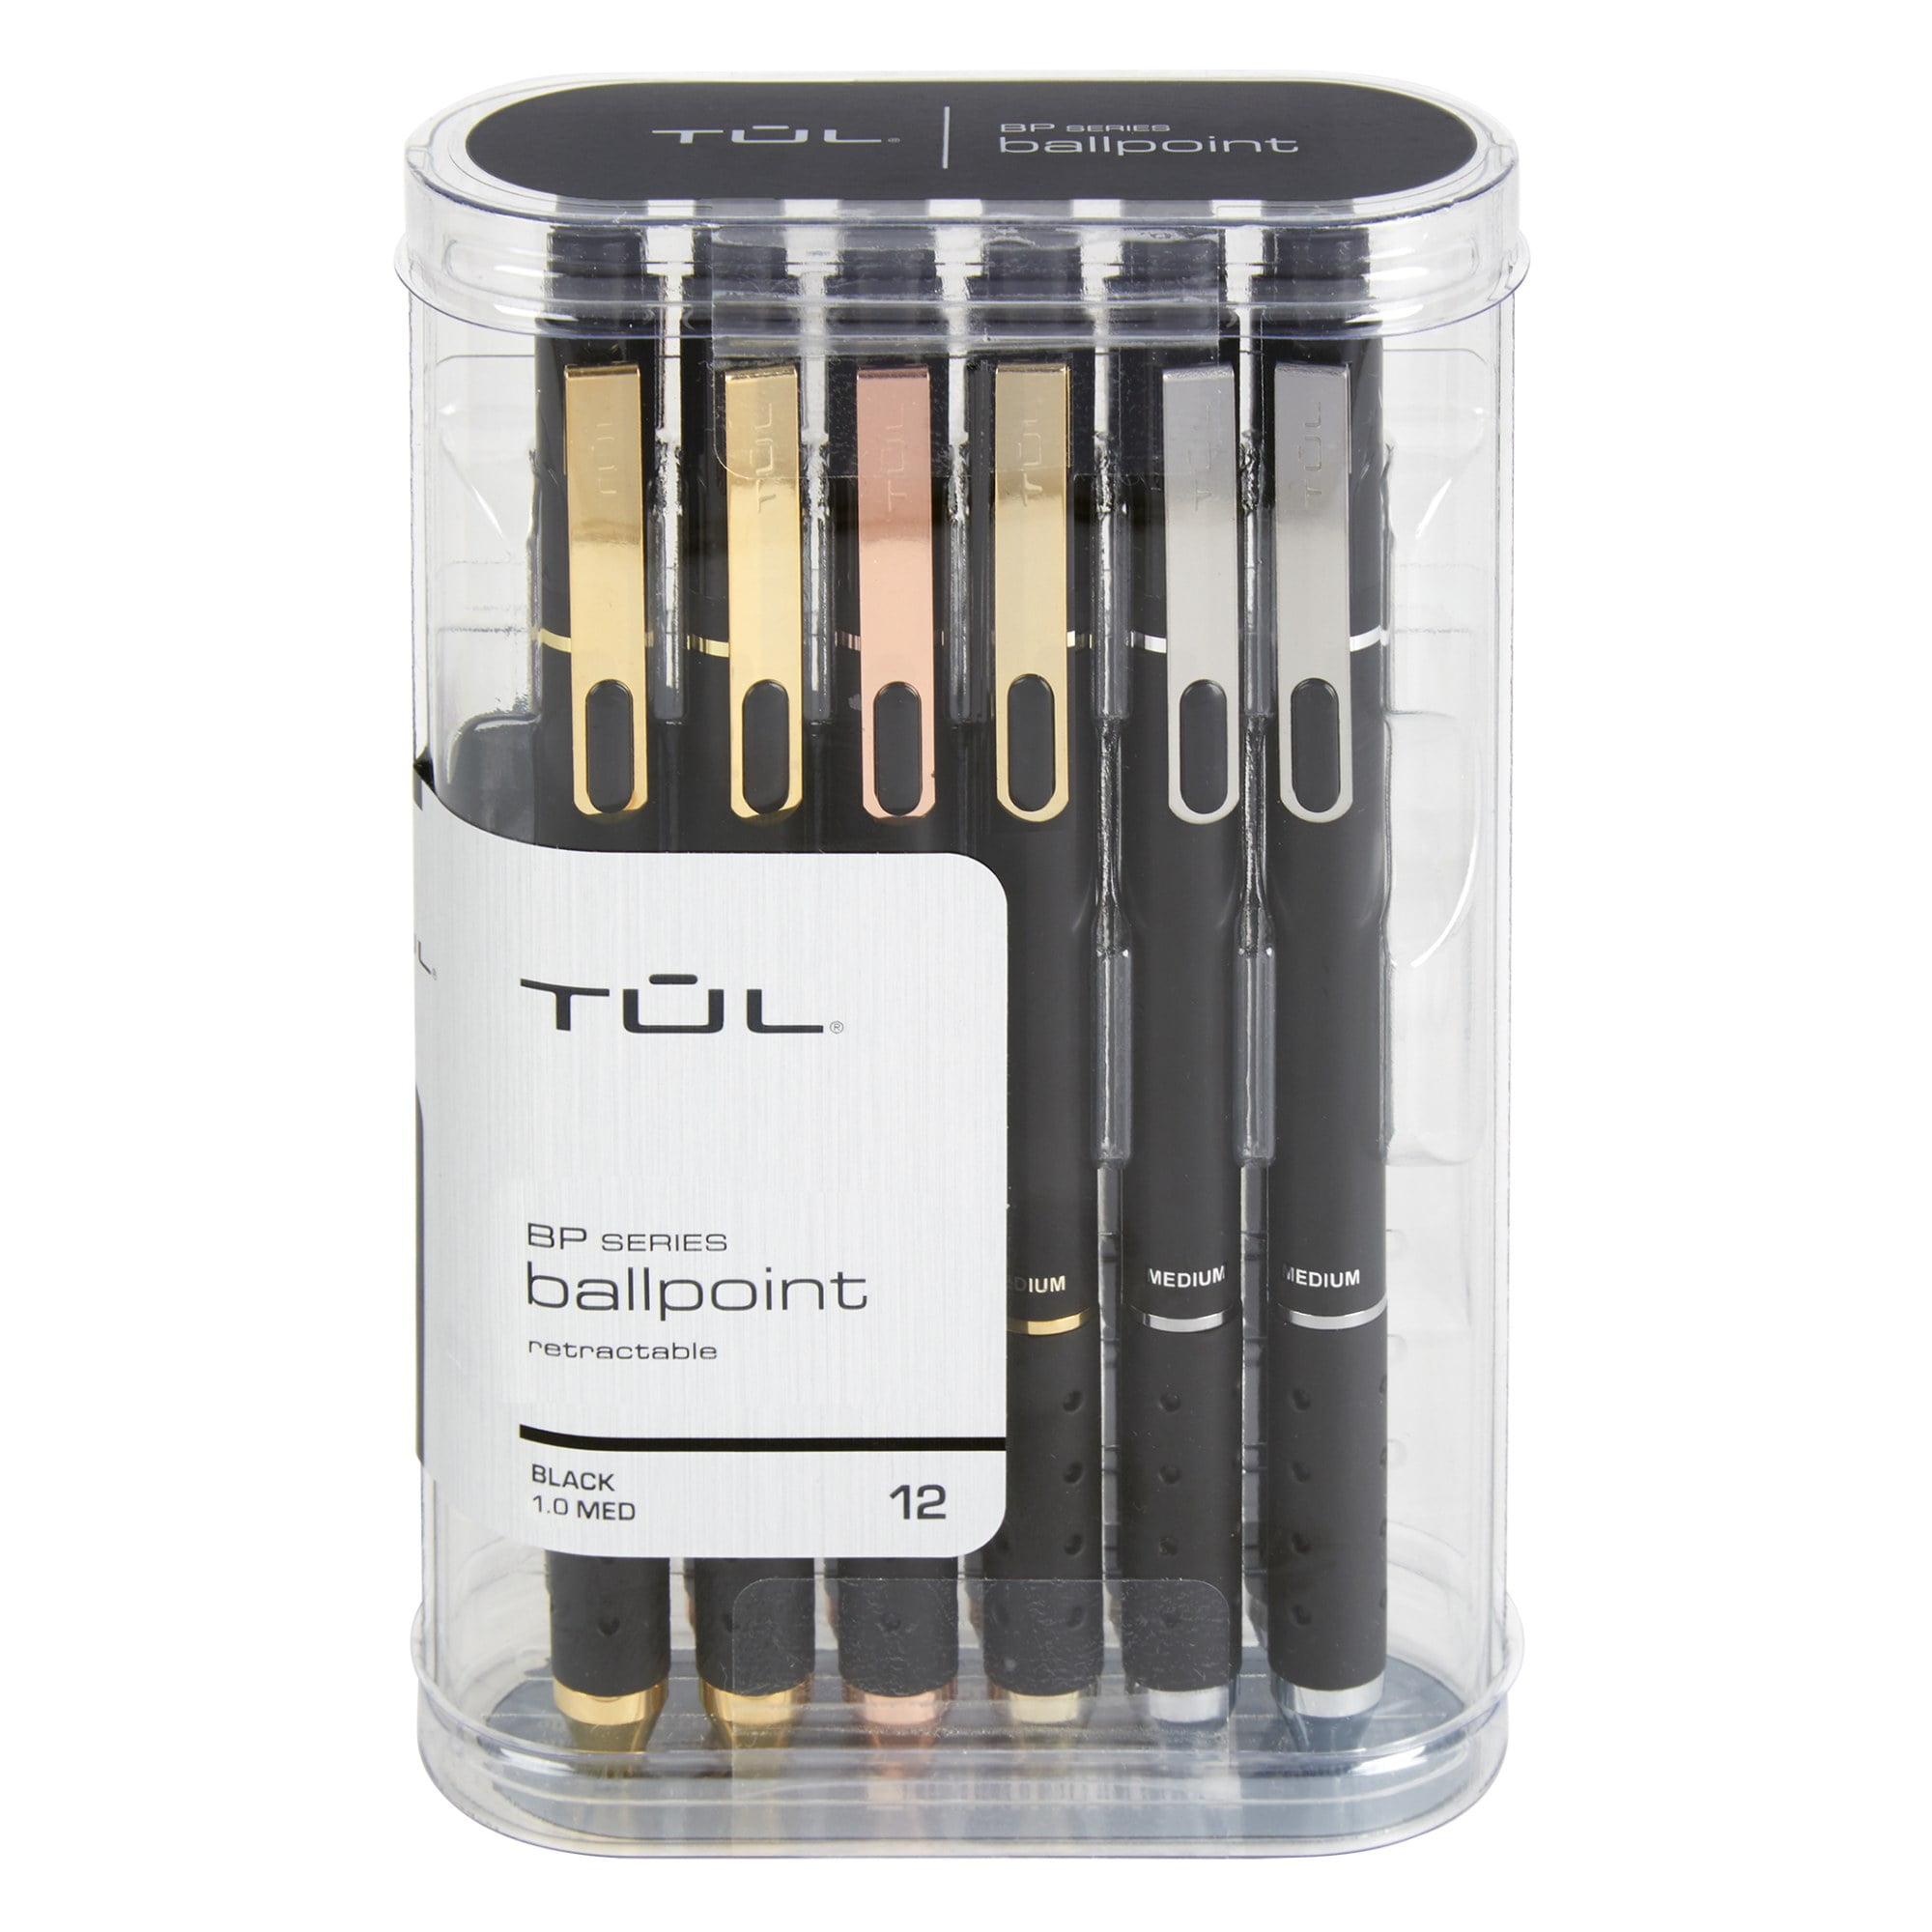 TUL BP3 Ballpoint, Retractable, Fine Point, 0.8 mm, Silver Barrel, Black Ink, Pack of 12